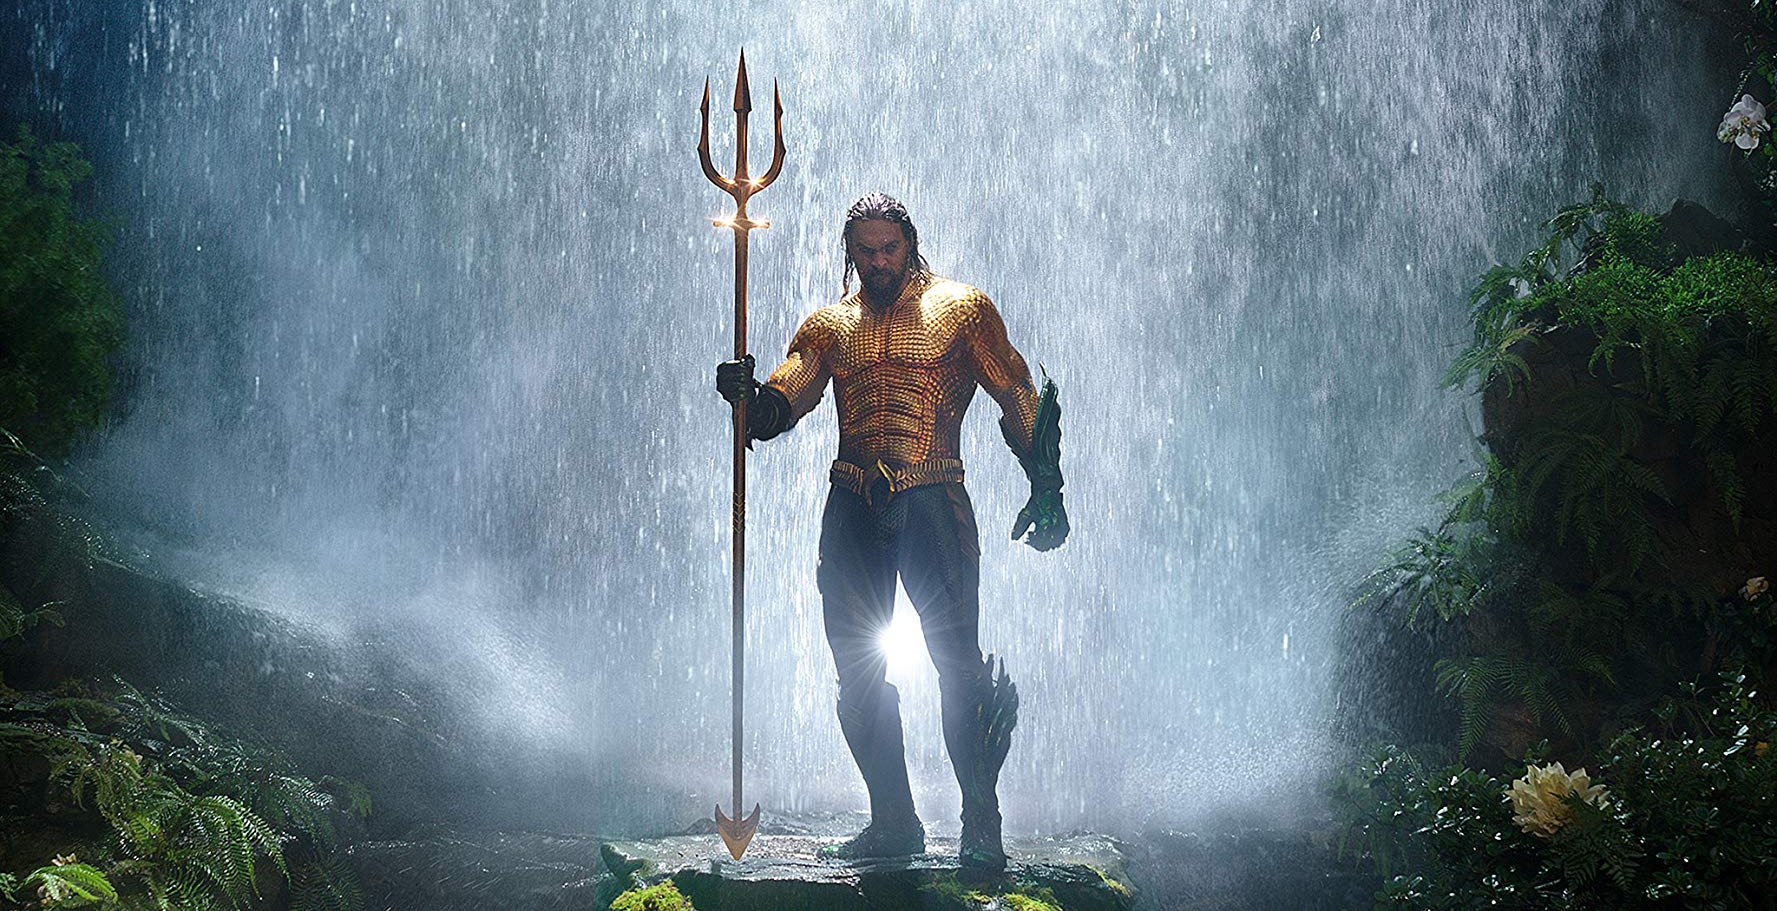 AQUAMAN Has a Few Moments But is Mostly Soggy